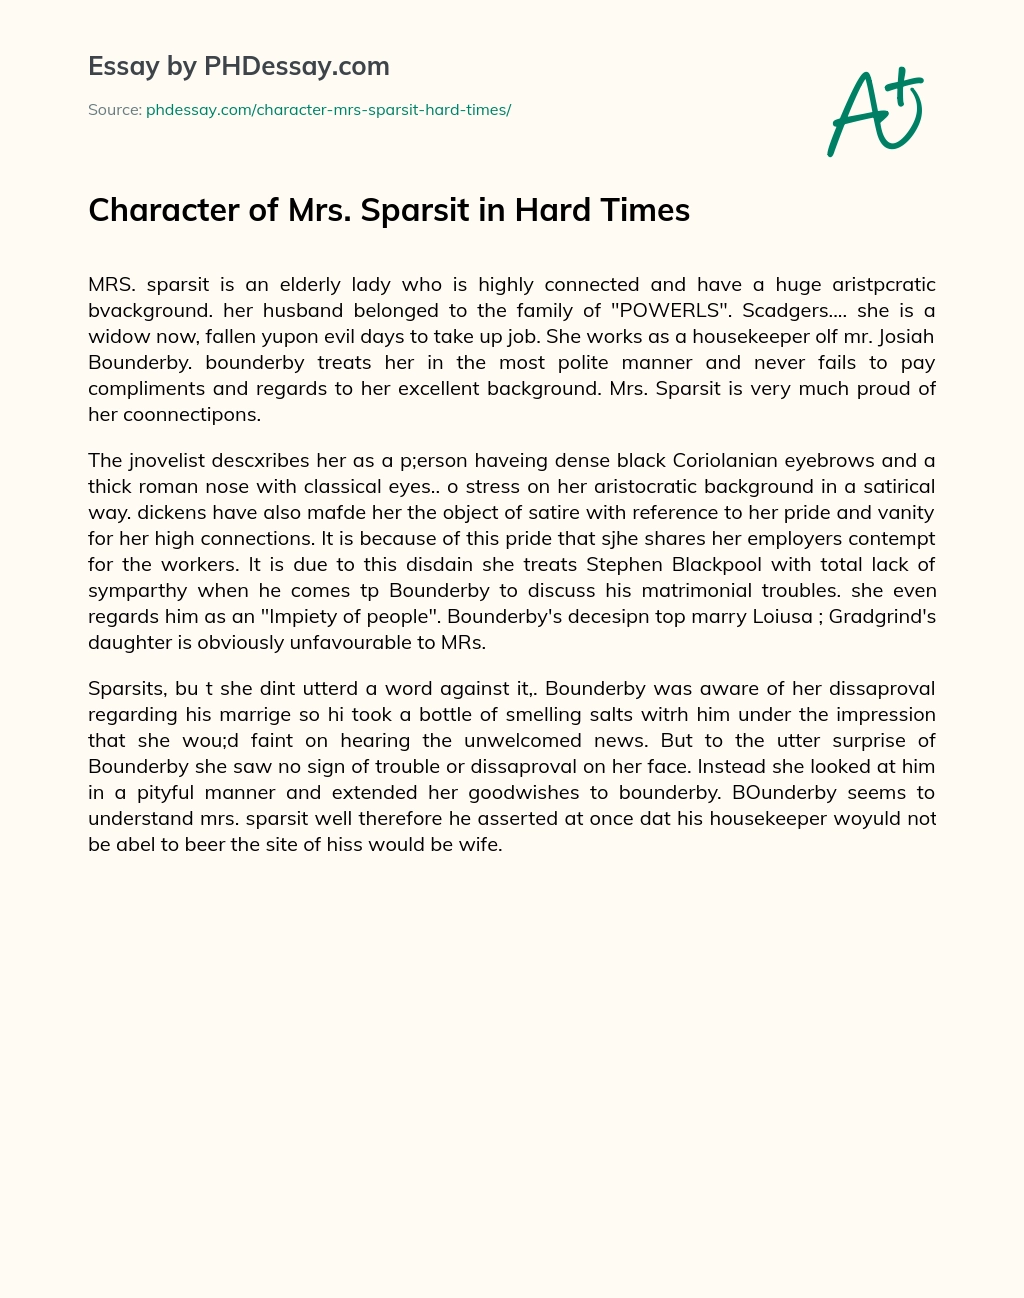 Character of Mrs. Sparsit in Hard Times essay